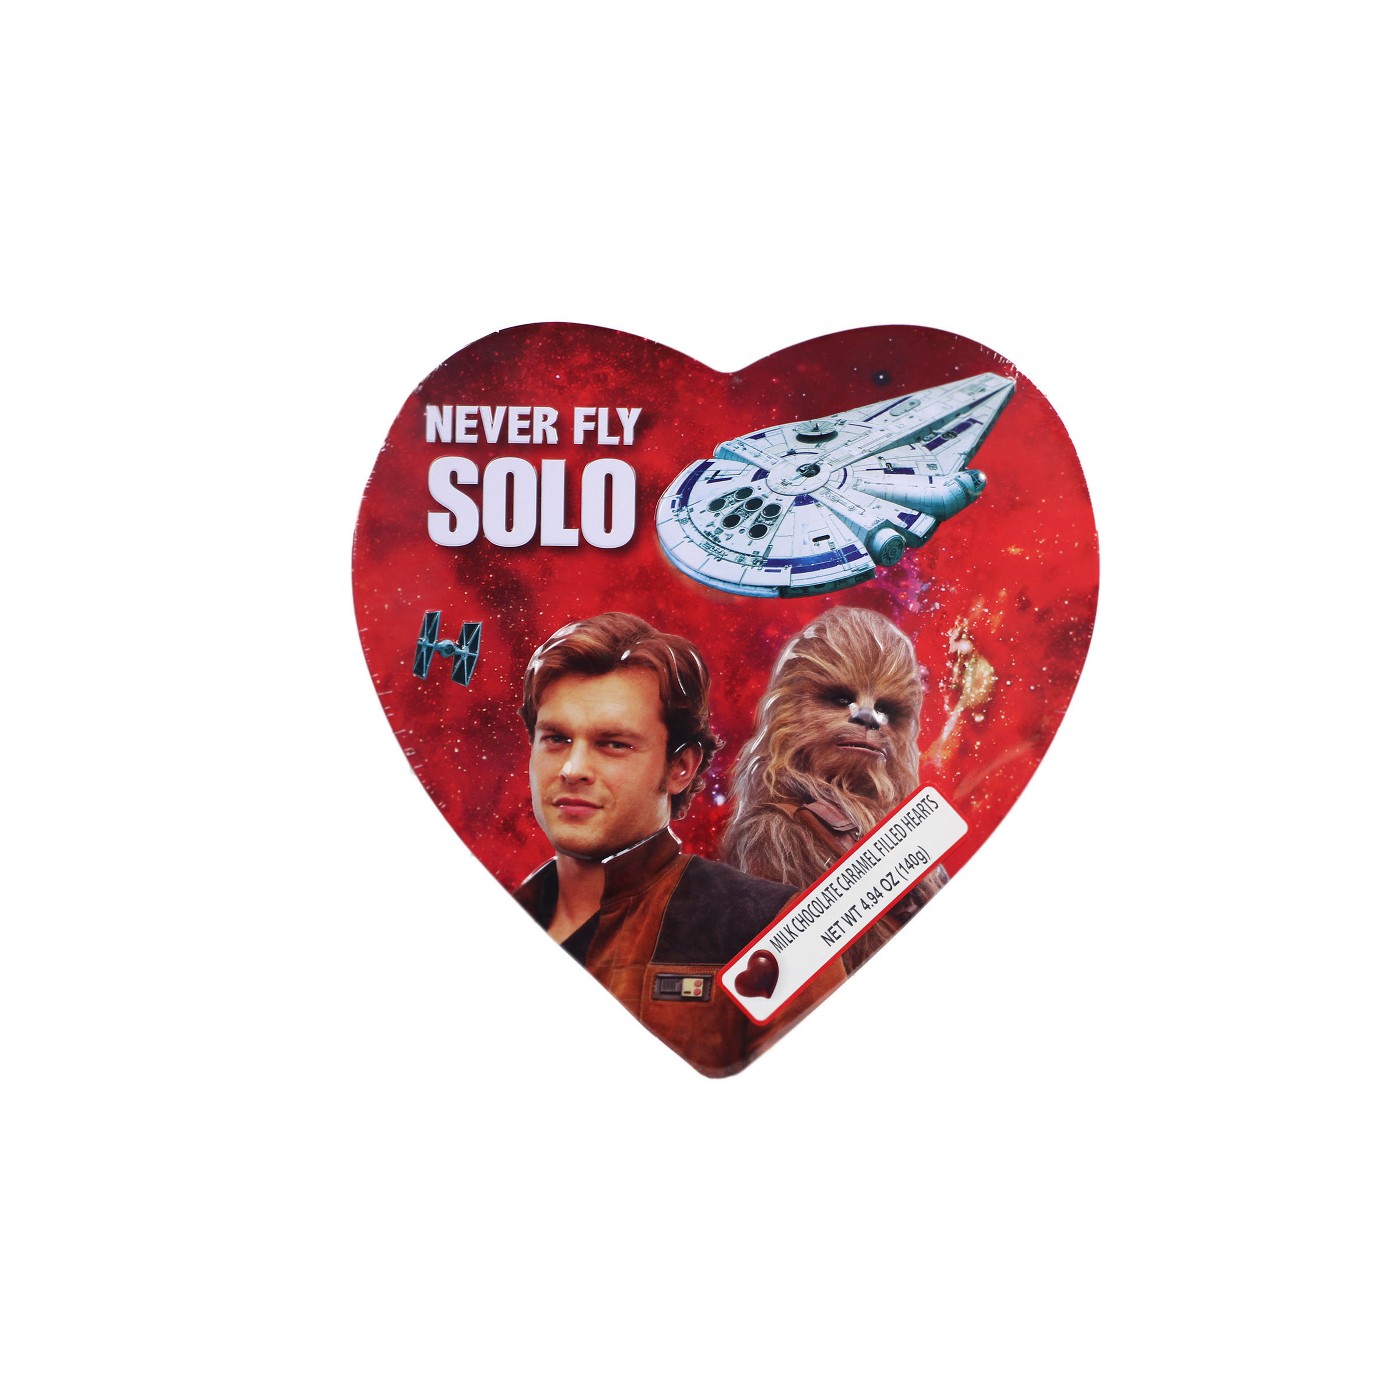 Galerie Valentine's Day Star Wars Han Solo Milk Chocolate Caramel Filled Hearts - 4.94oz - image 1 of 1